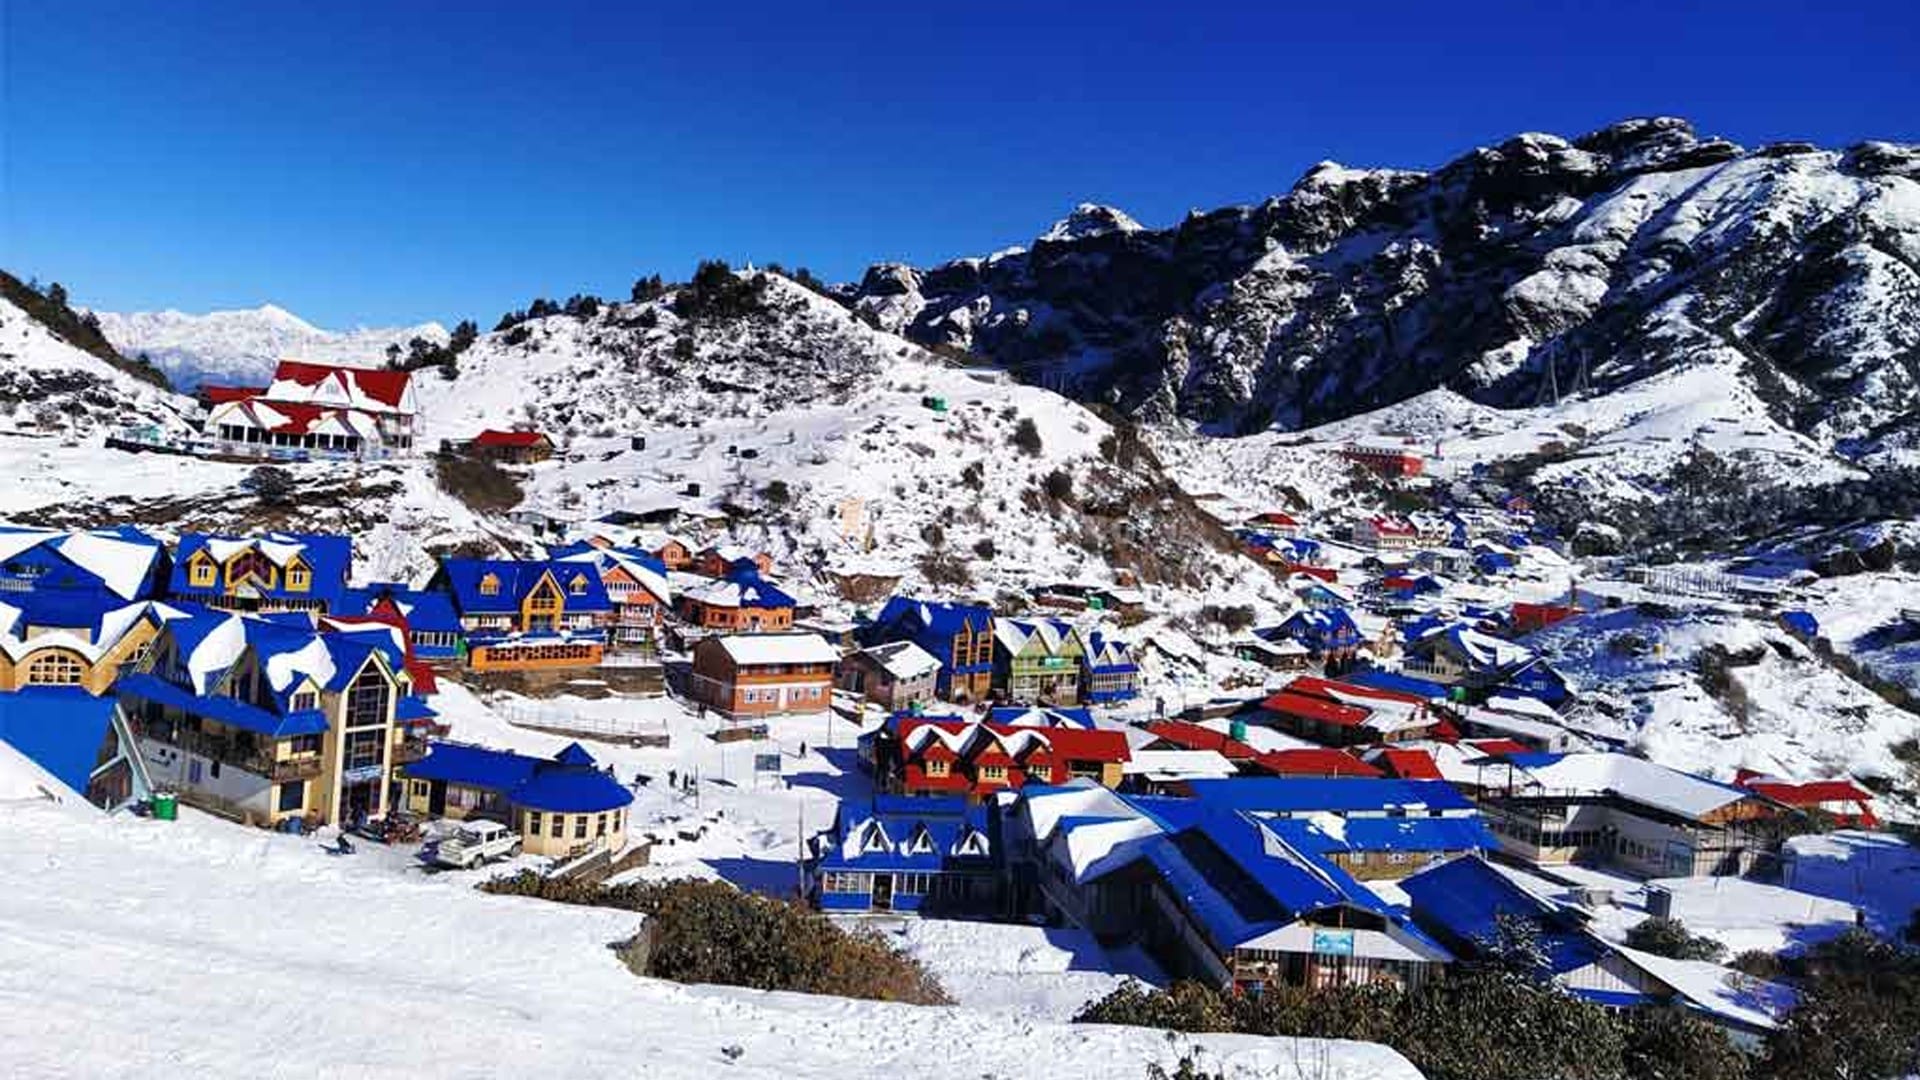 Places in Nepal where snow falls in winter